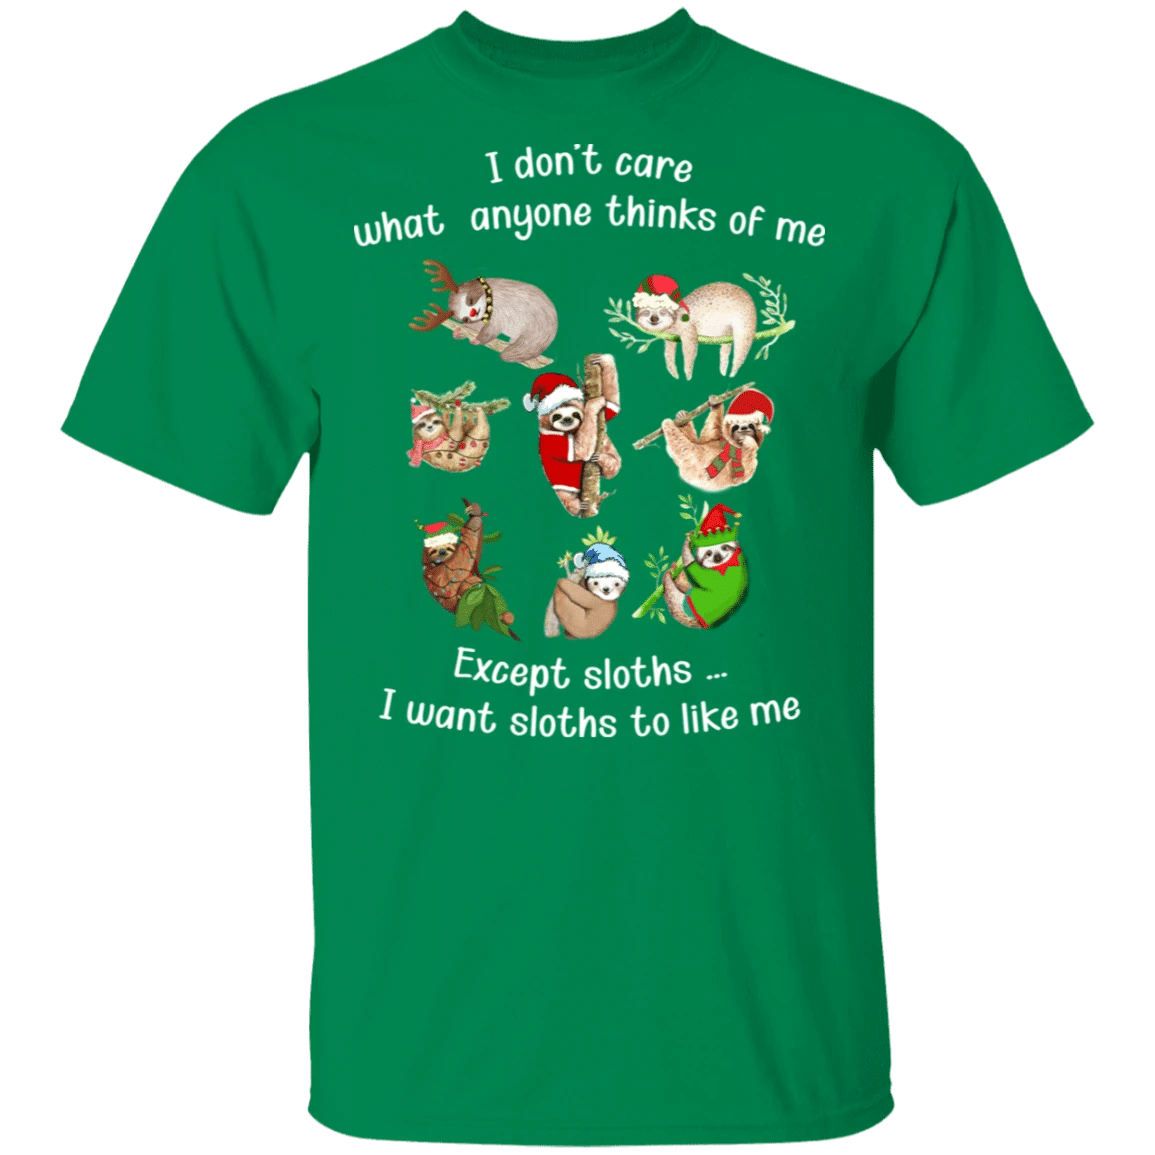 I Don't Care What Anyone Thinks Of Me Except Sloths T-Shirt Xmas Shirt Designs For Sloth Lovers